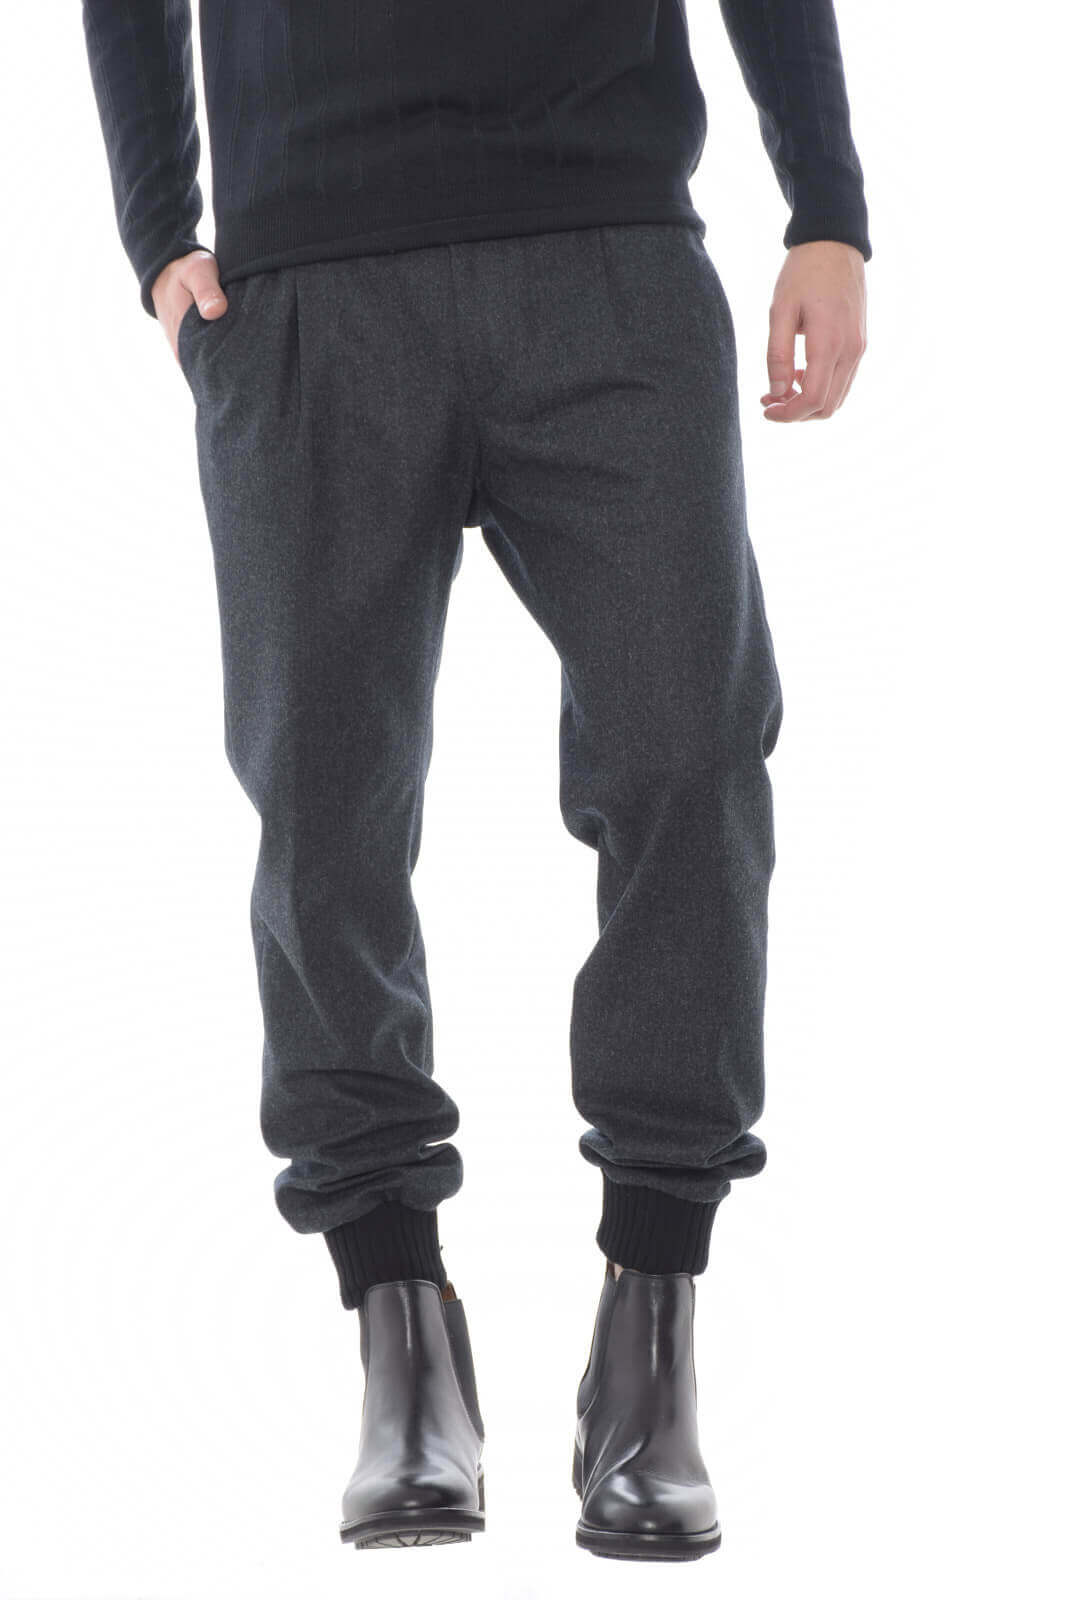 Tagliatore Men's trousers with ribbed cuffs